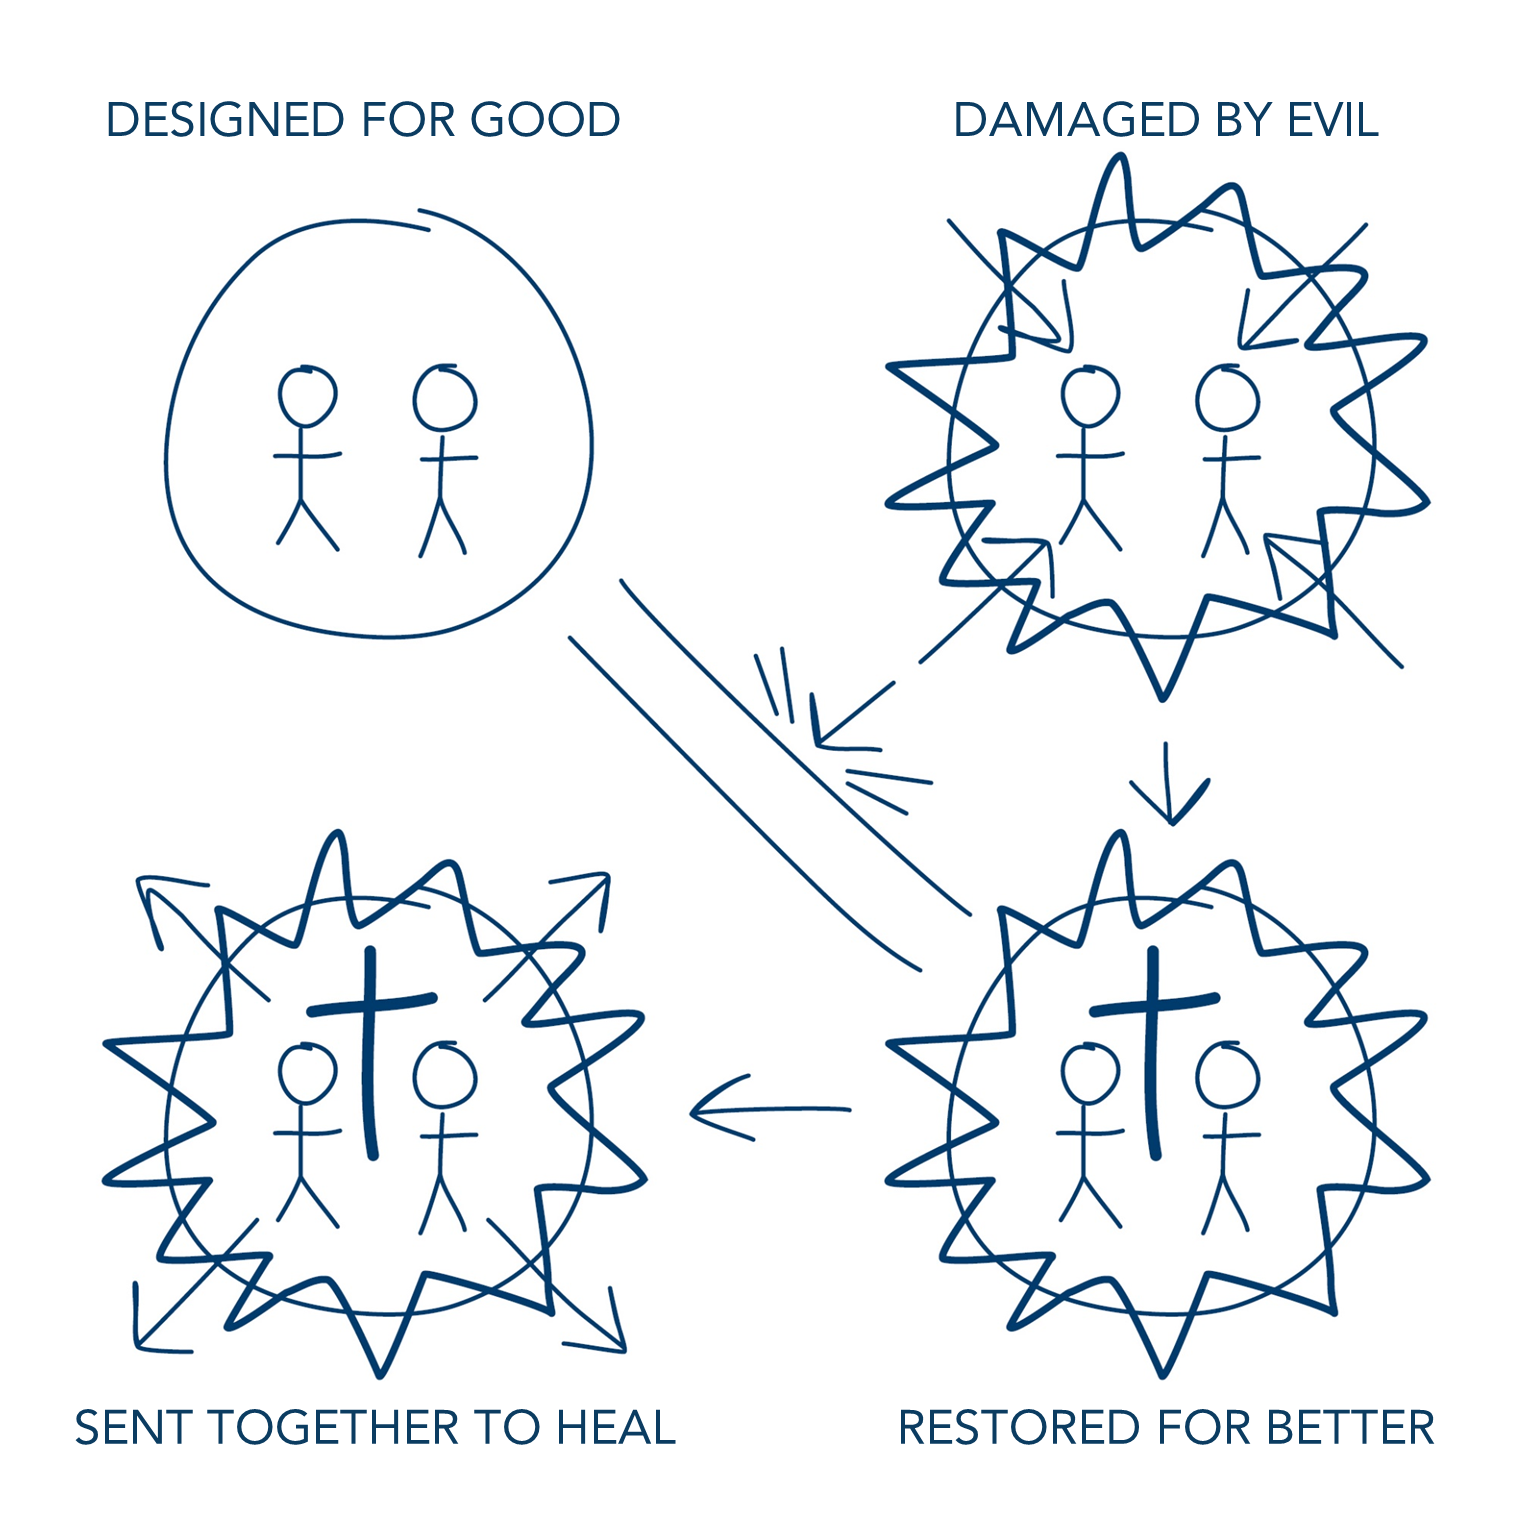 diagram of 4 circles to present the gospel. 1. Designed for Good; 2. Damaged by Evil; 3. Restored for Better; 4. Sent Together to Heal